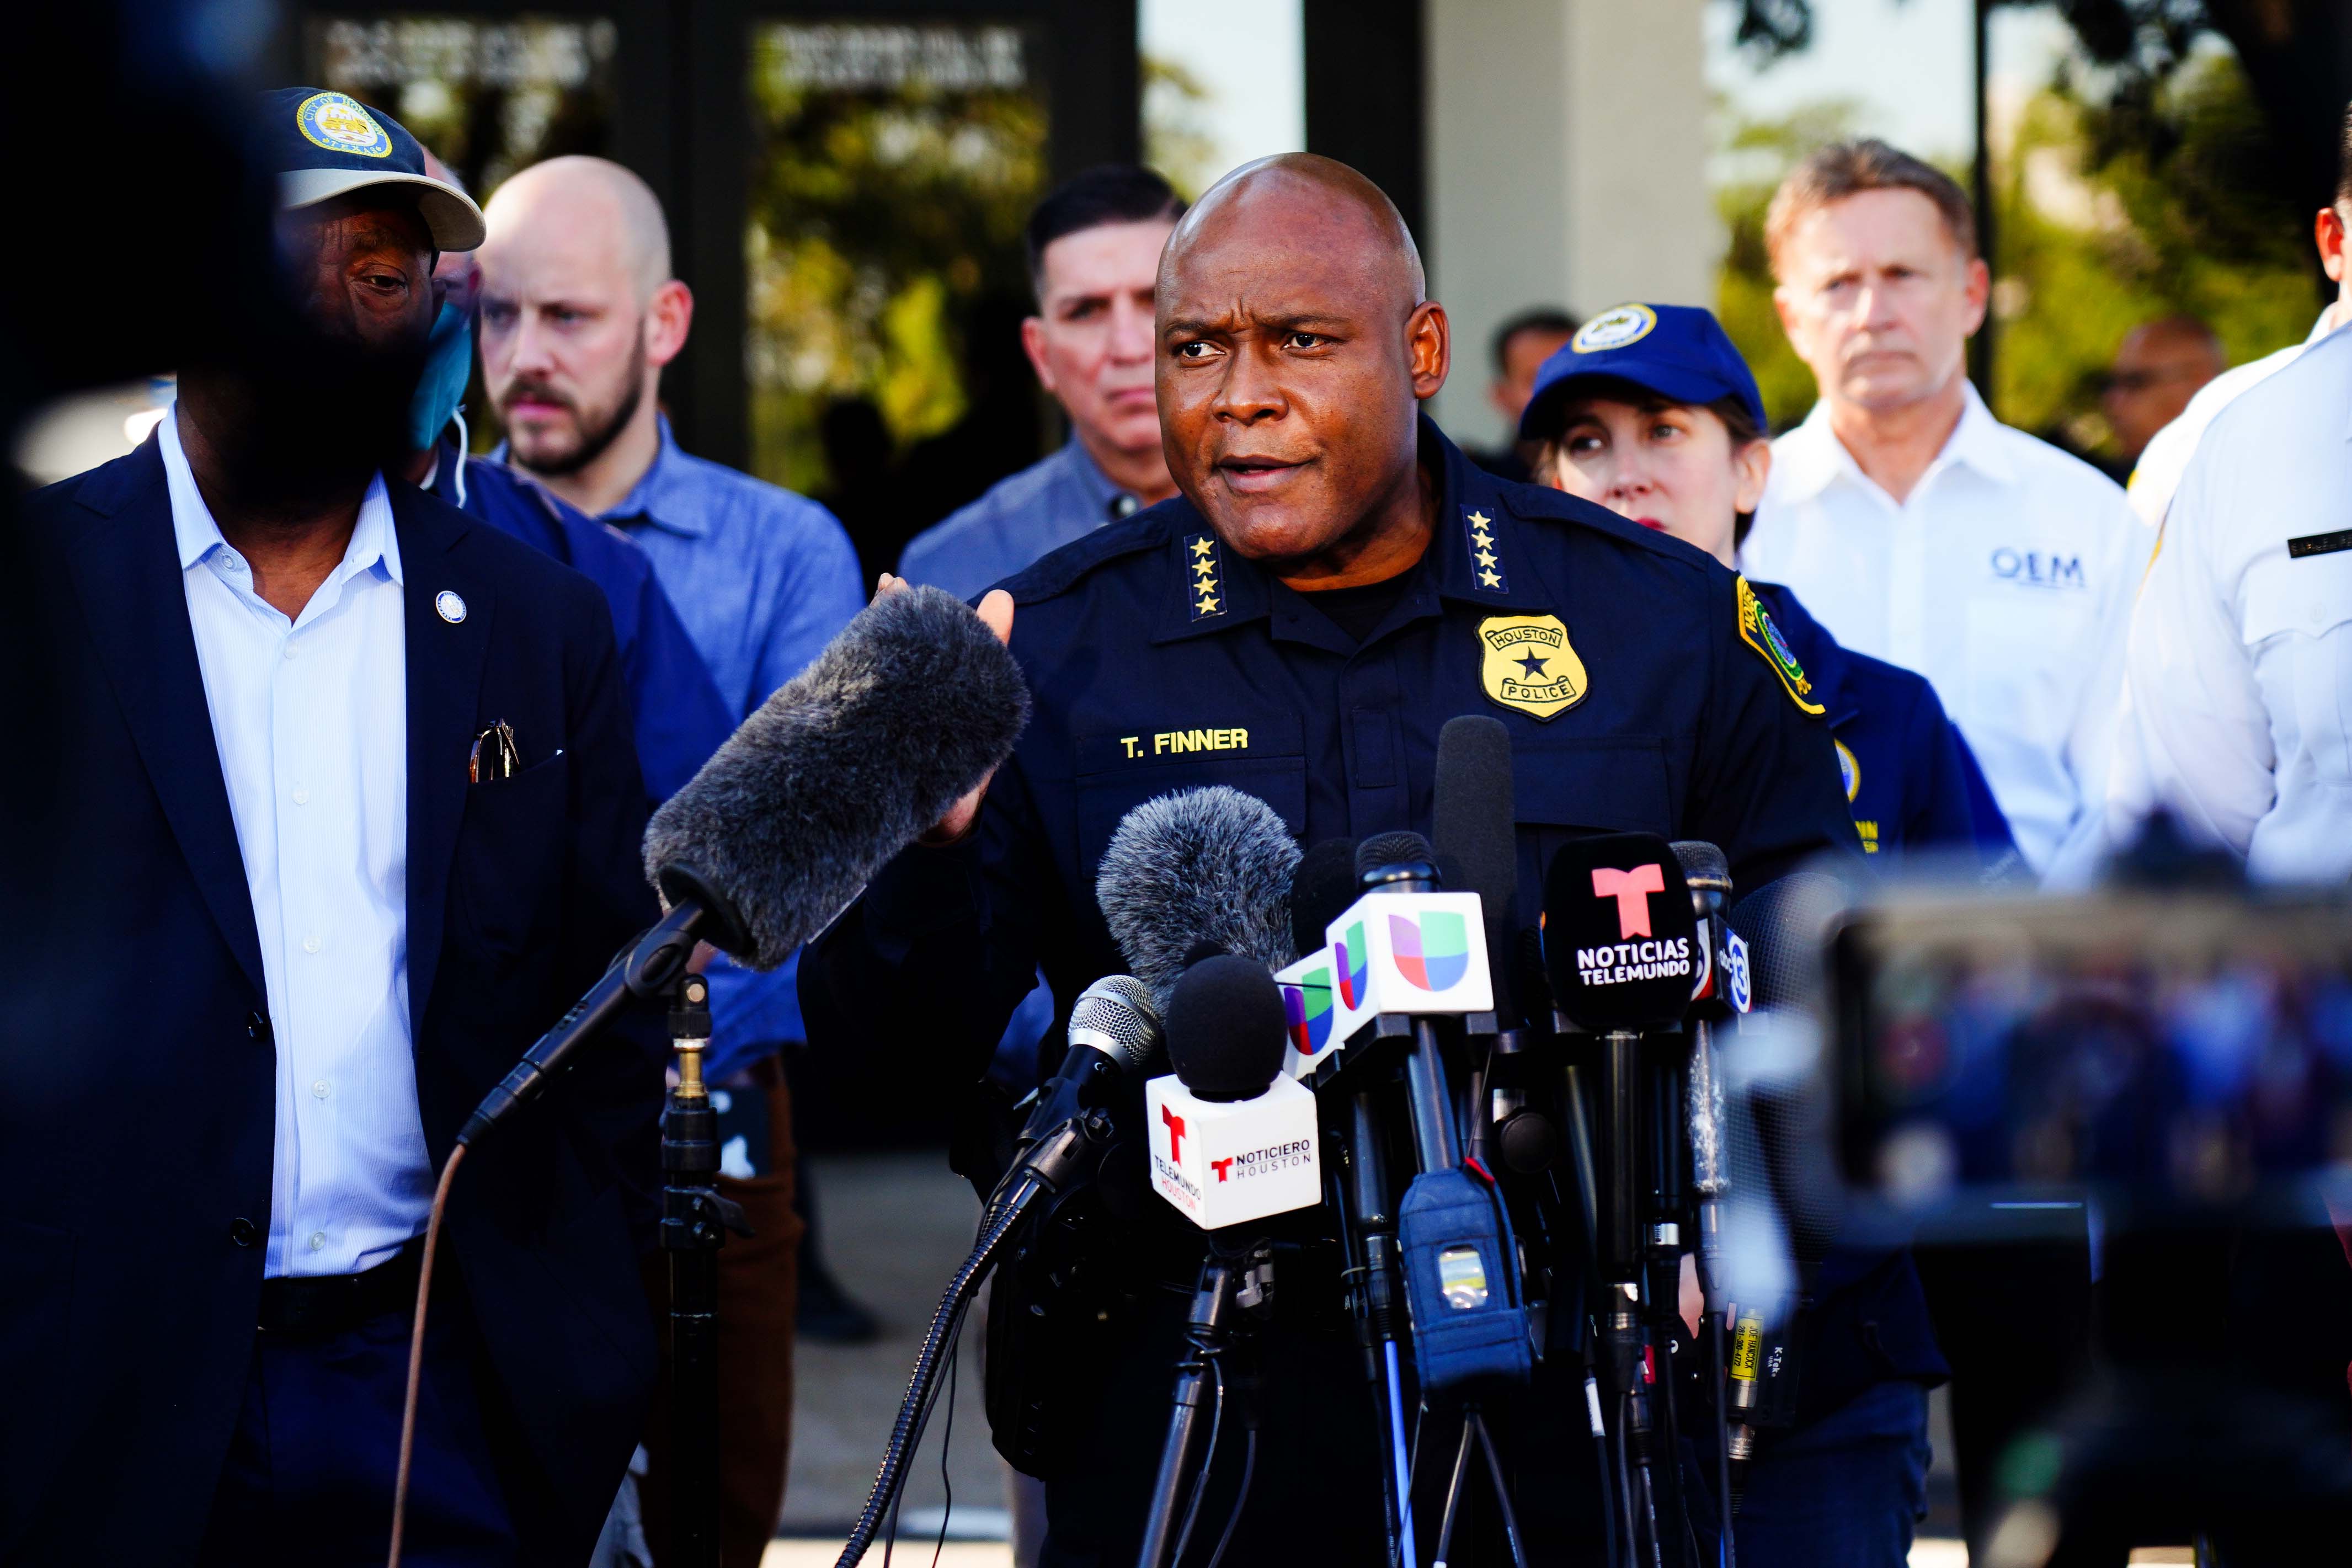 Houston Chief of Police Troy Finner (speaking at a press conference about the tragedy) is said to have personally warned Travis Scott ahead of the show